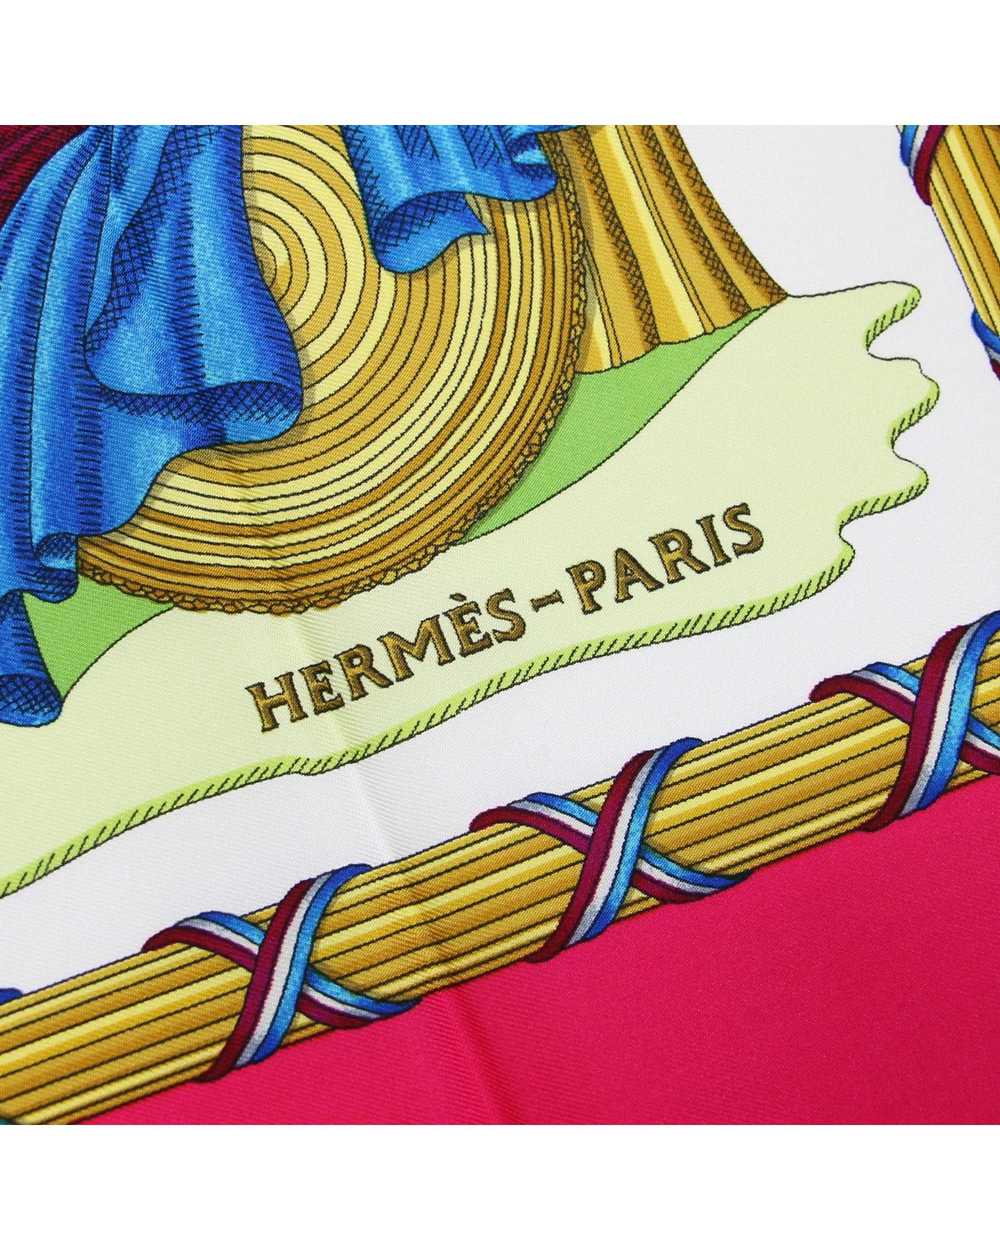 Hermes Vintage Silk Scarf with Pink and White Hues - image 2